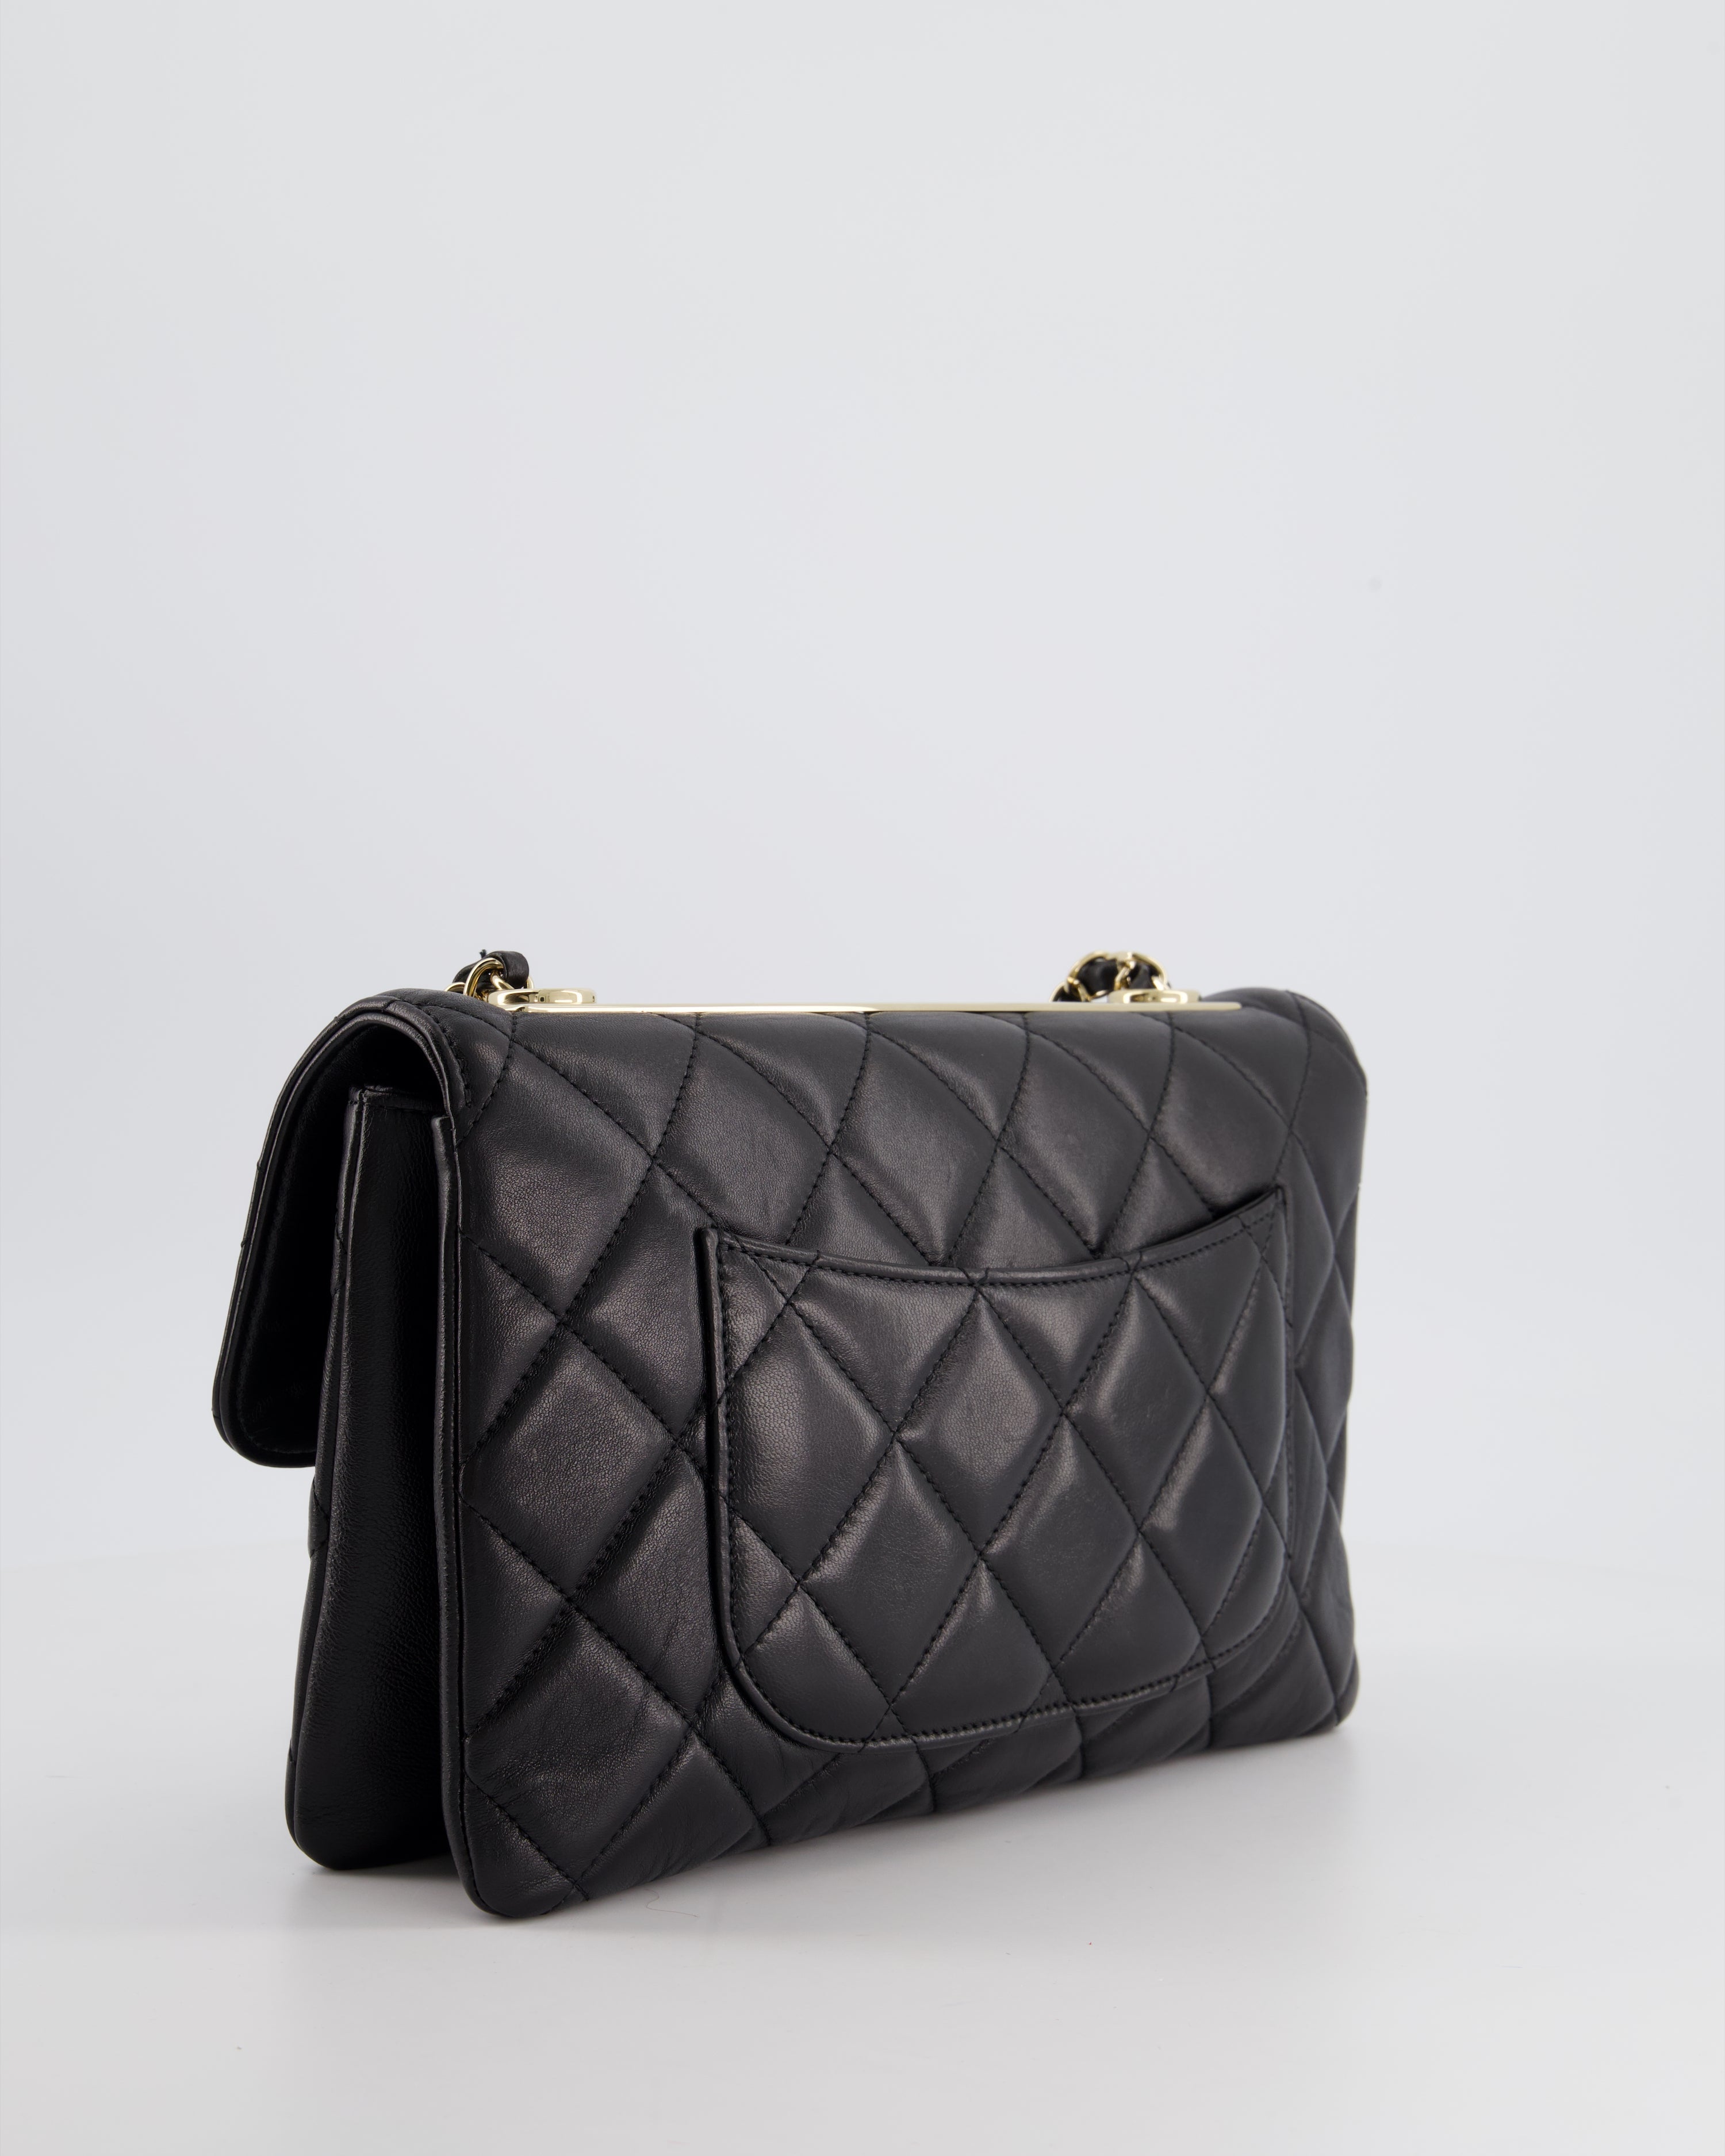 Chanel Black Trendy CC Shoulder Bag in Lambskin Leather with Champagne Gold Hardware